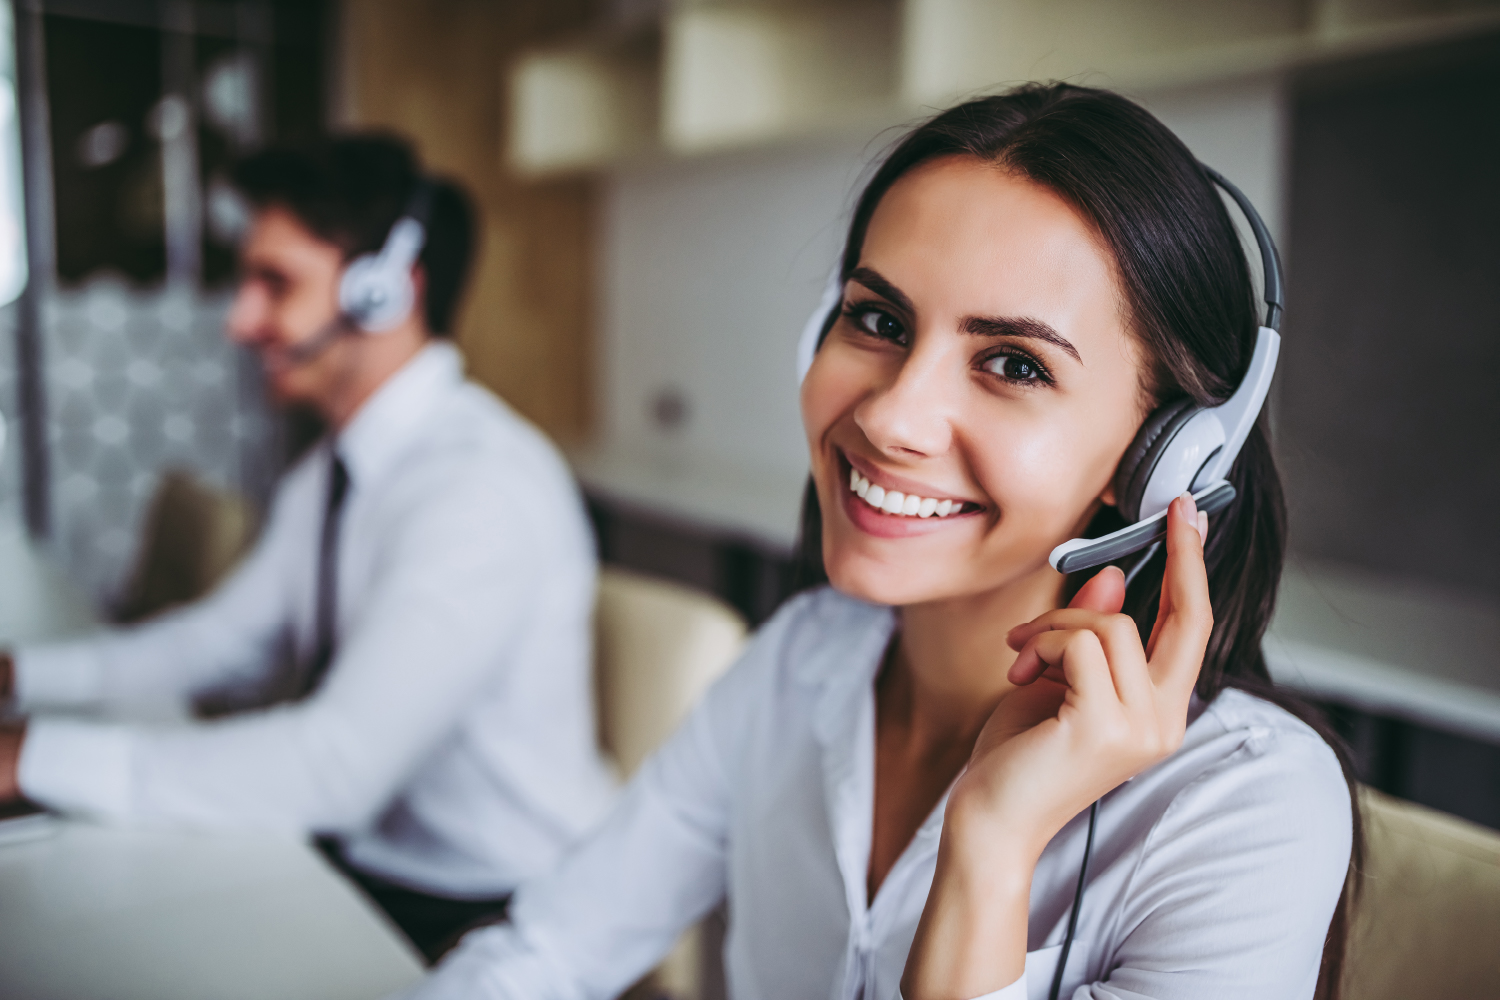 5 Ways That IVR Can Be Used to Improve Customer Service